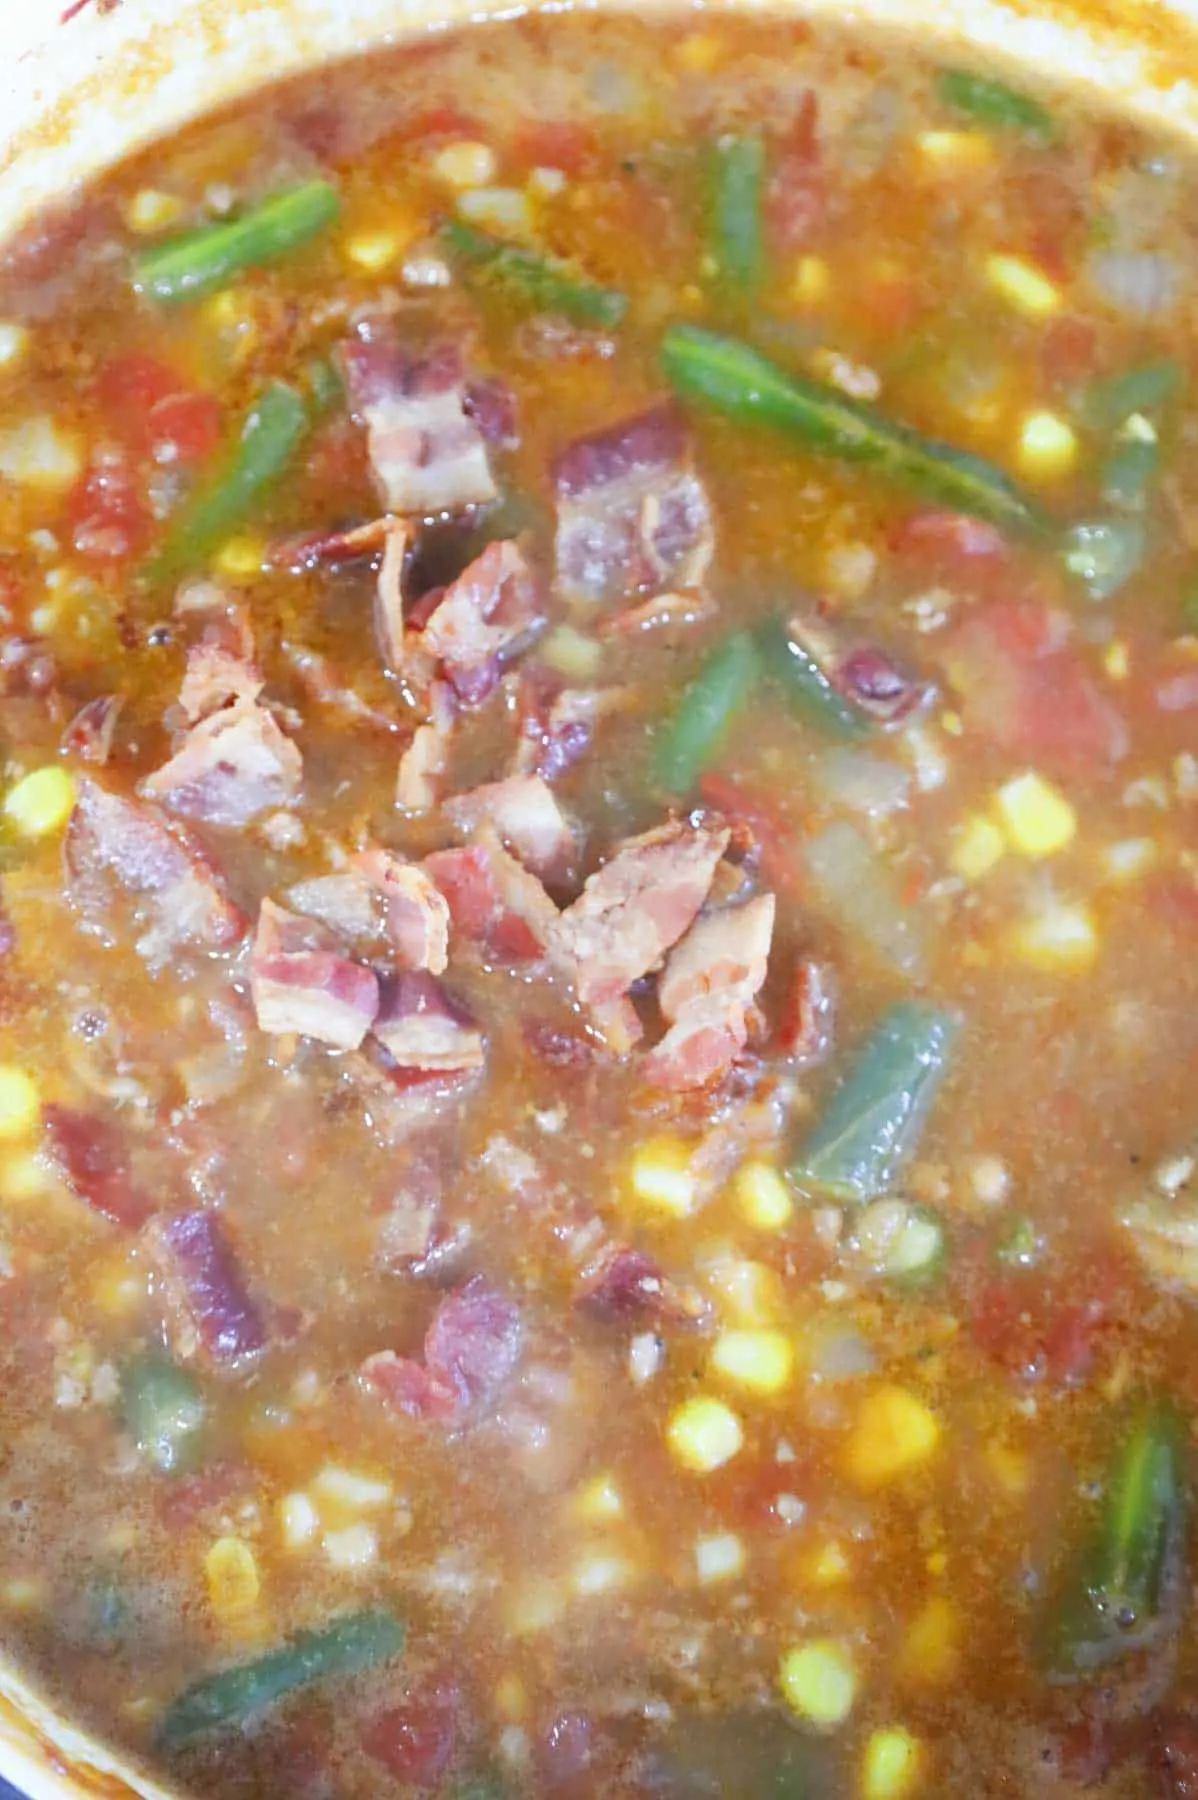 bacon pieces added to cowboy soup